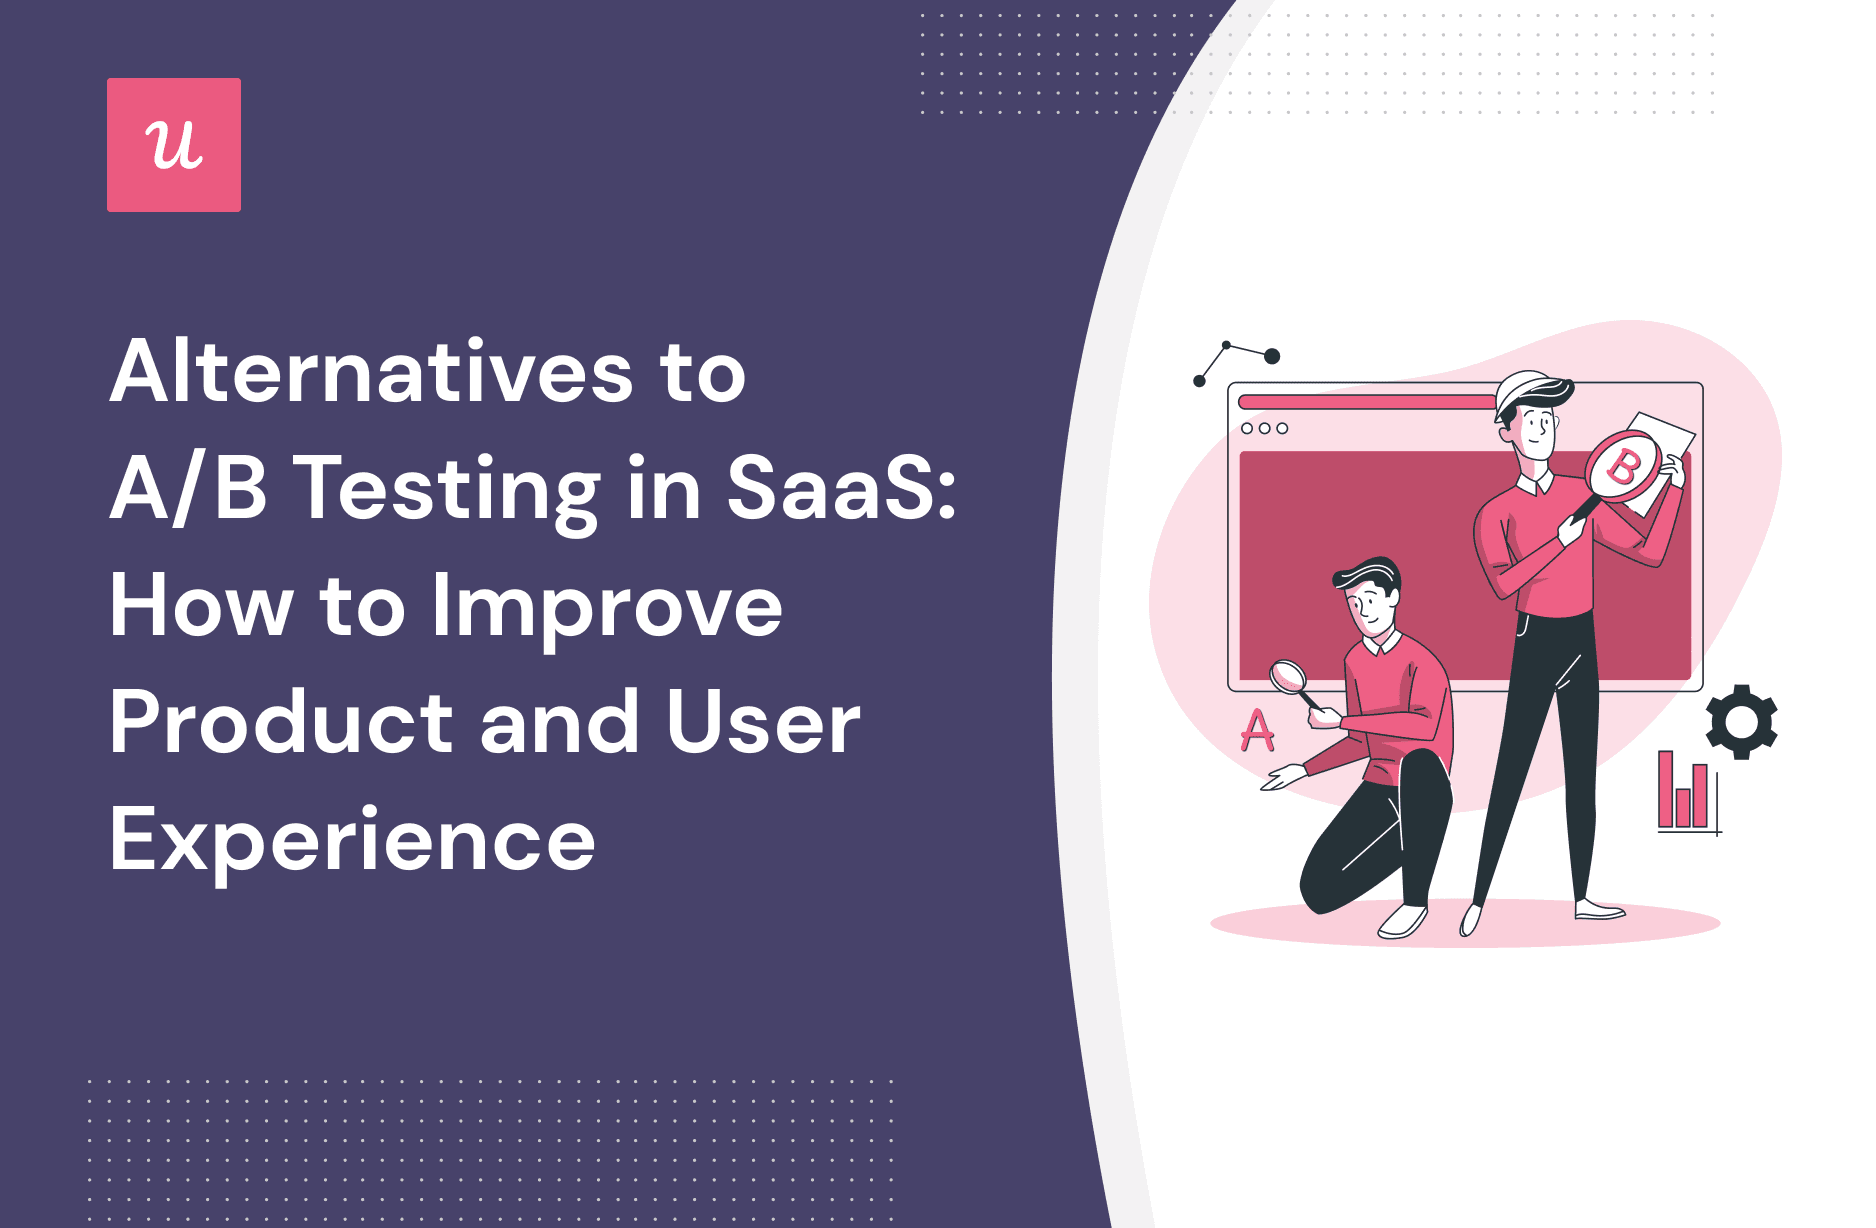 Alternatives to A/B Testing in SaaS: How to Improve Product and User Experience cover